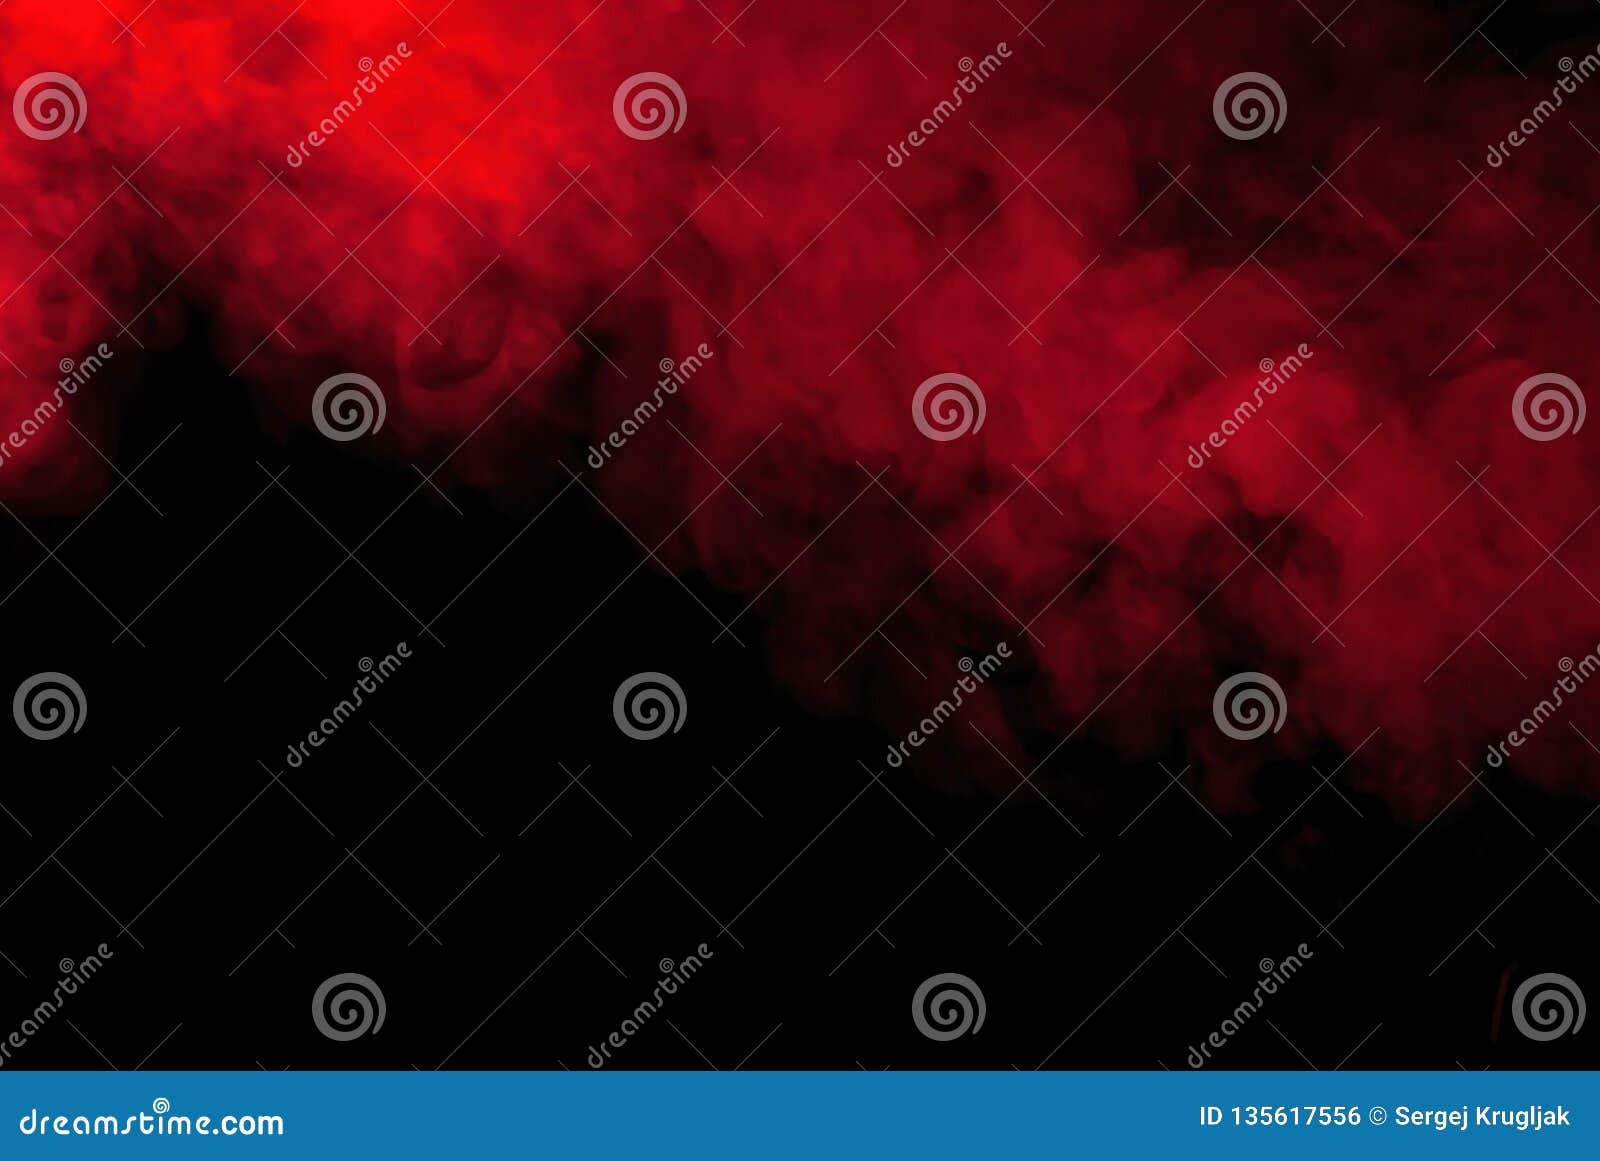 Red Smoke or Steam on a Black for Wallpapers and Backgrounds Stock Photo - Image of background, copy: 135617556